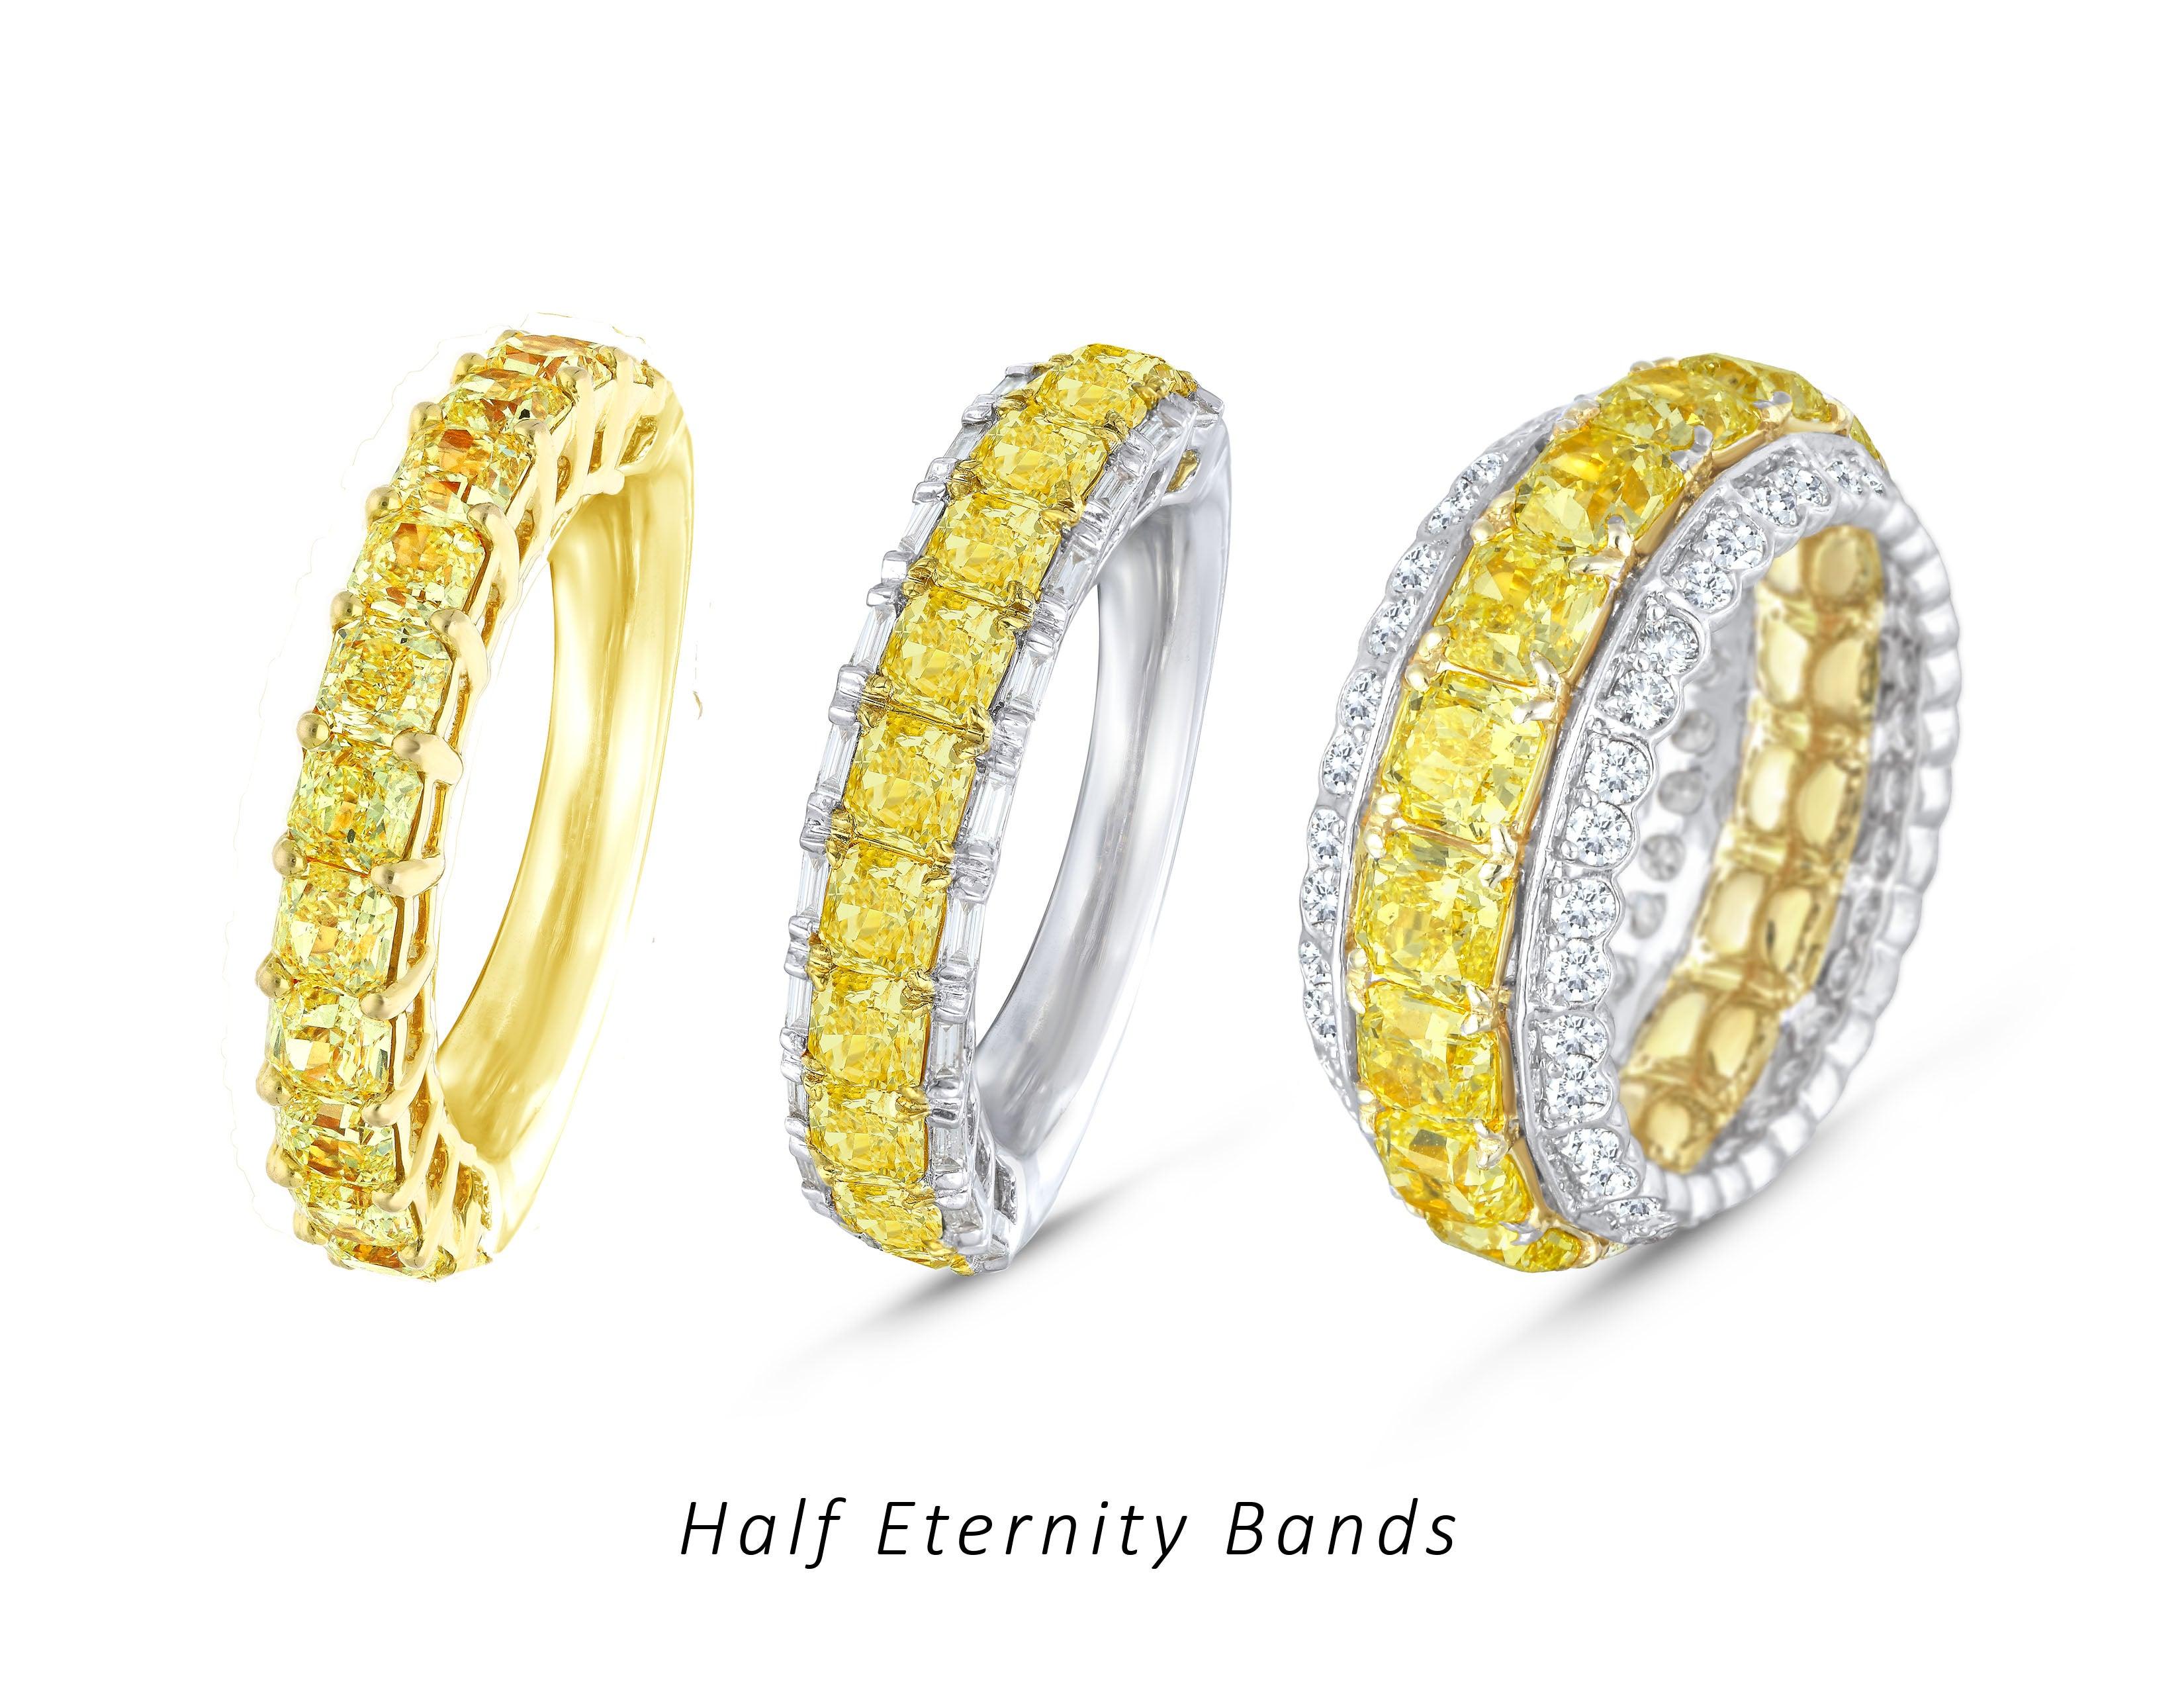 For Sale:  Eternity Band Half with Round Diamonds, 2.29 Carat 4